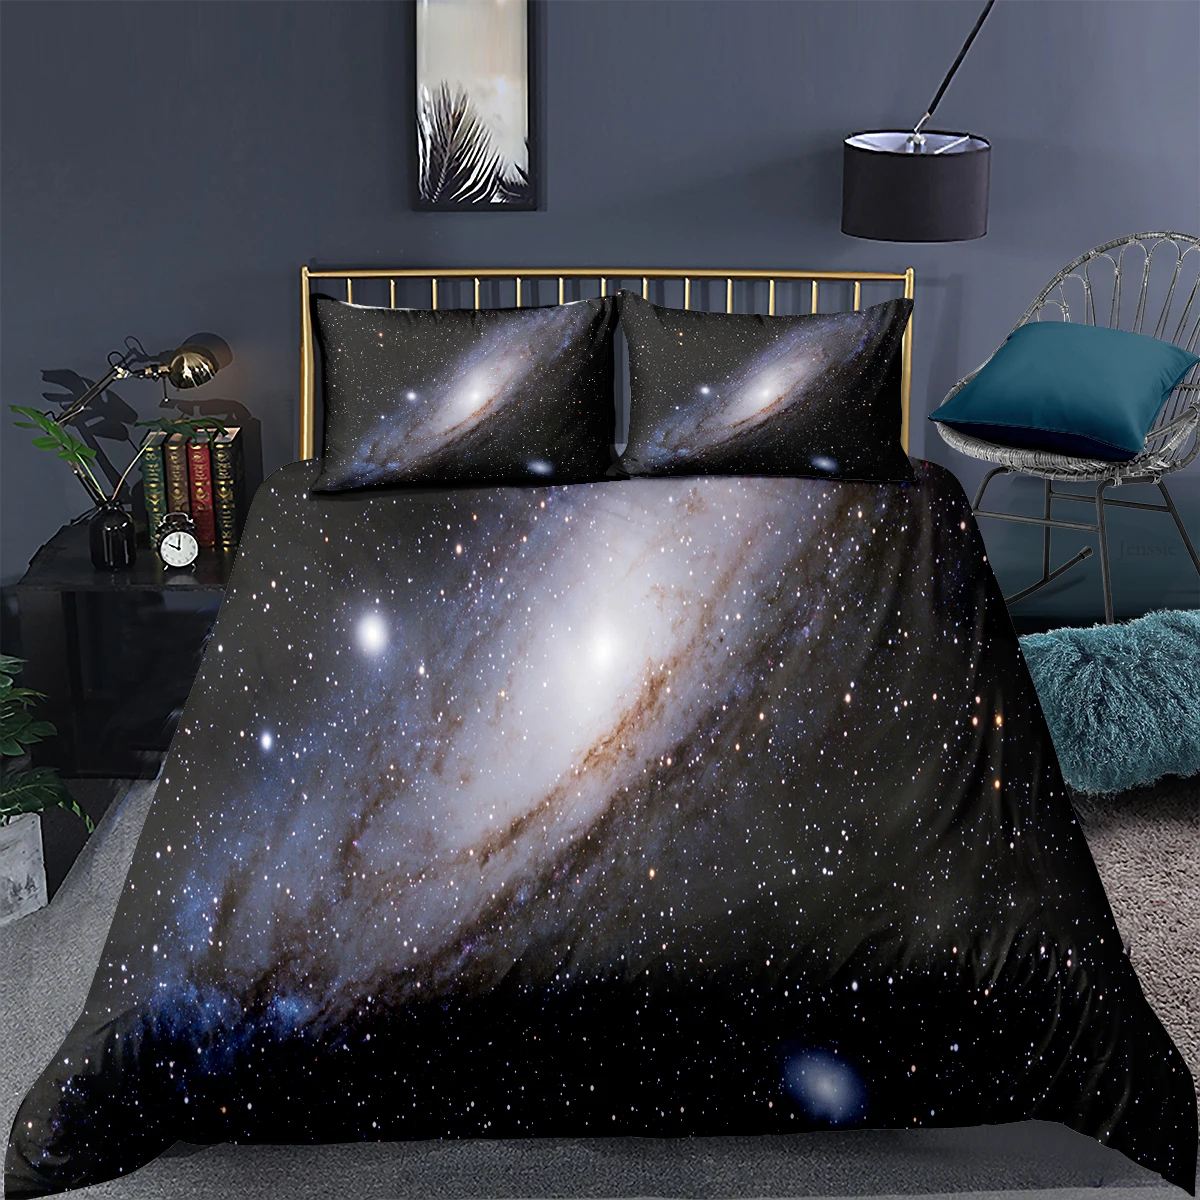 

Universe Outer Space Themed 3d Printing Bedspread Galaxy Series Duvet Cover Queen King Size Comforter Bedding Set For Kids Adult